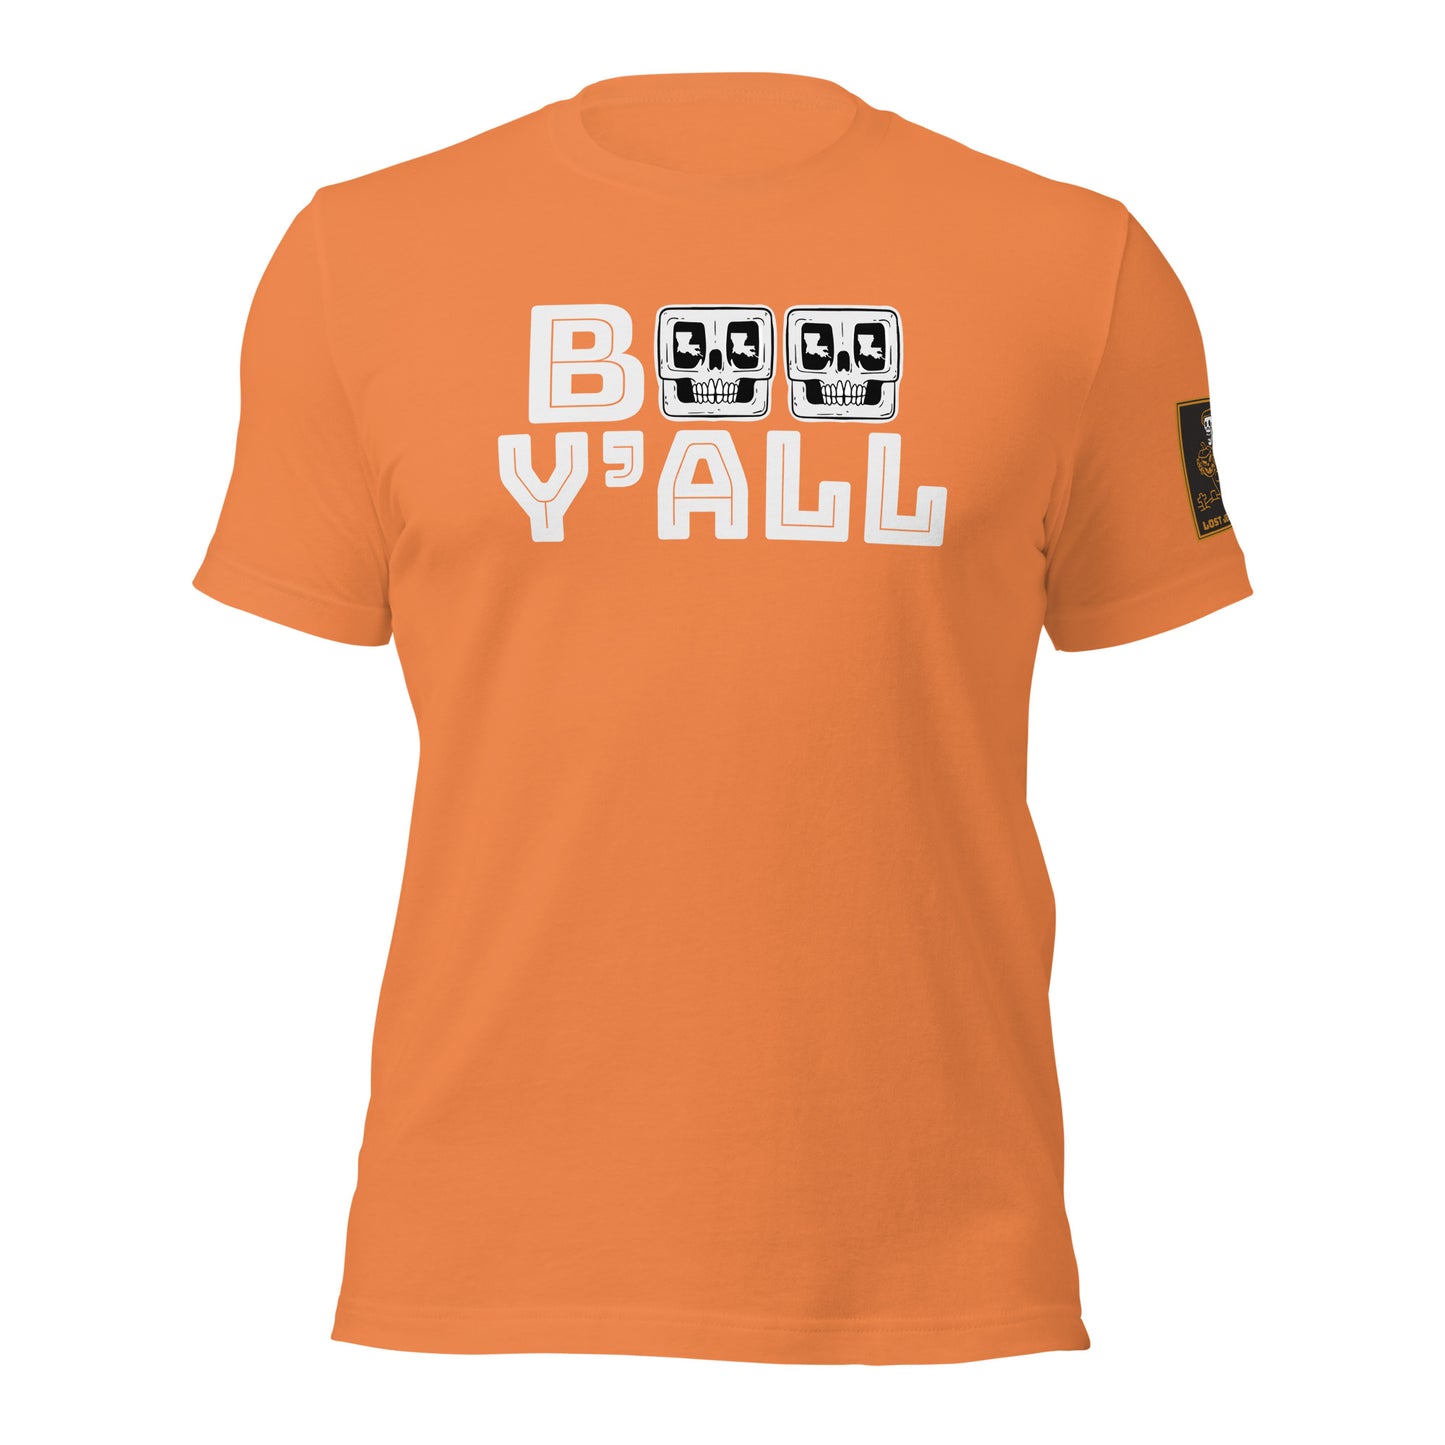 BOO Y'ALL - LOUISIANA SPECIAL - WHITE FONT - BELLA+CANVAS - Unisex t-shirt